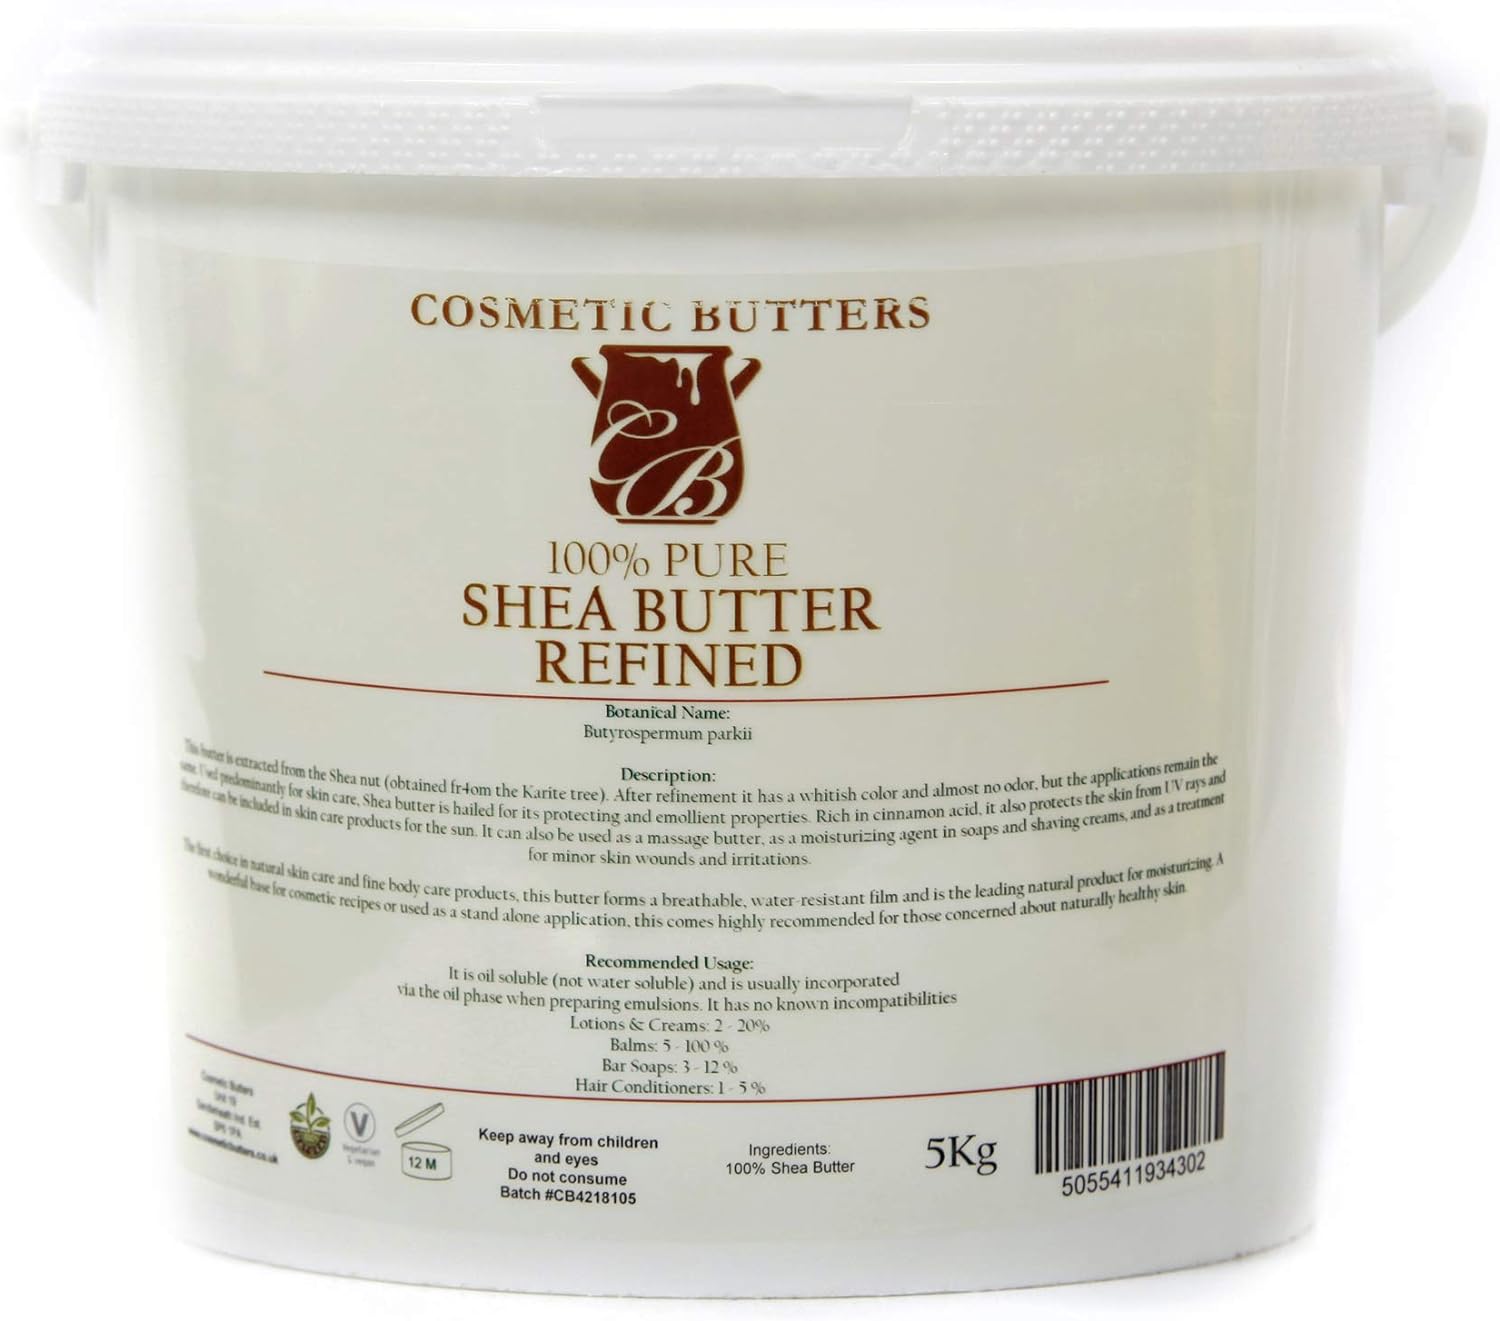 Mystic Moments | Shea Butter Refined Butter 5Kg - Pure & Natural Cosmetic Butters Vegan GMO Free